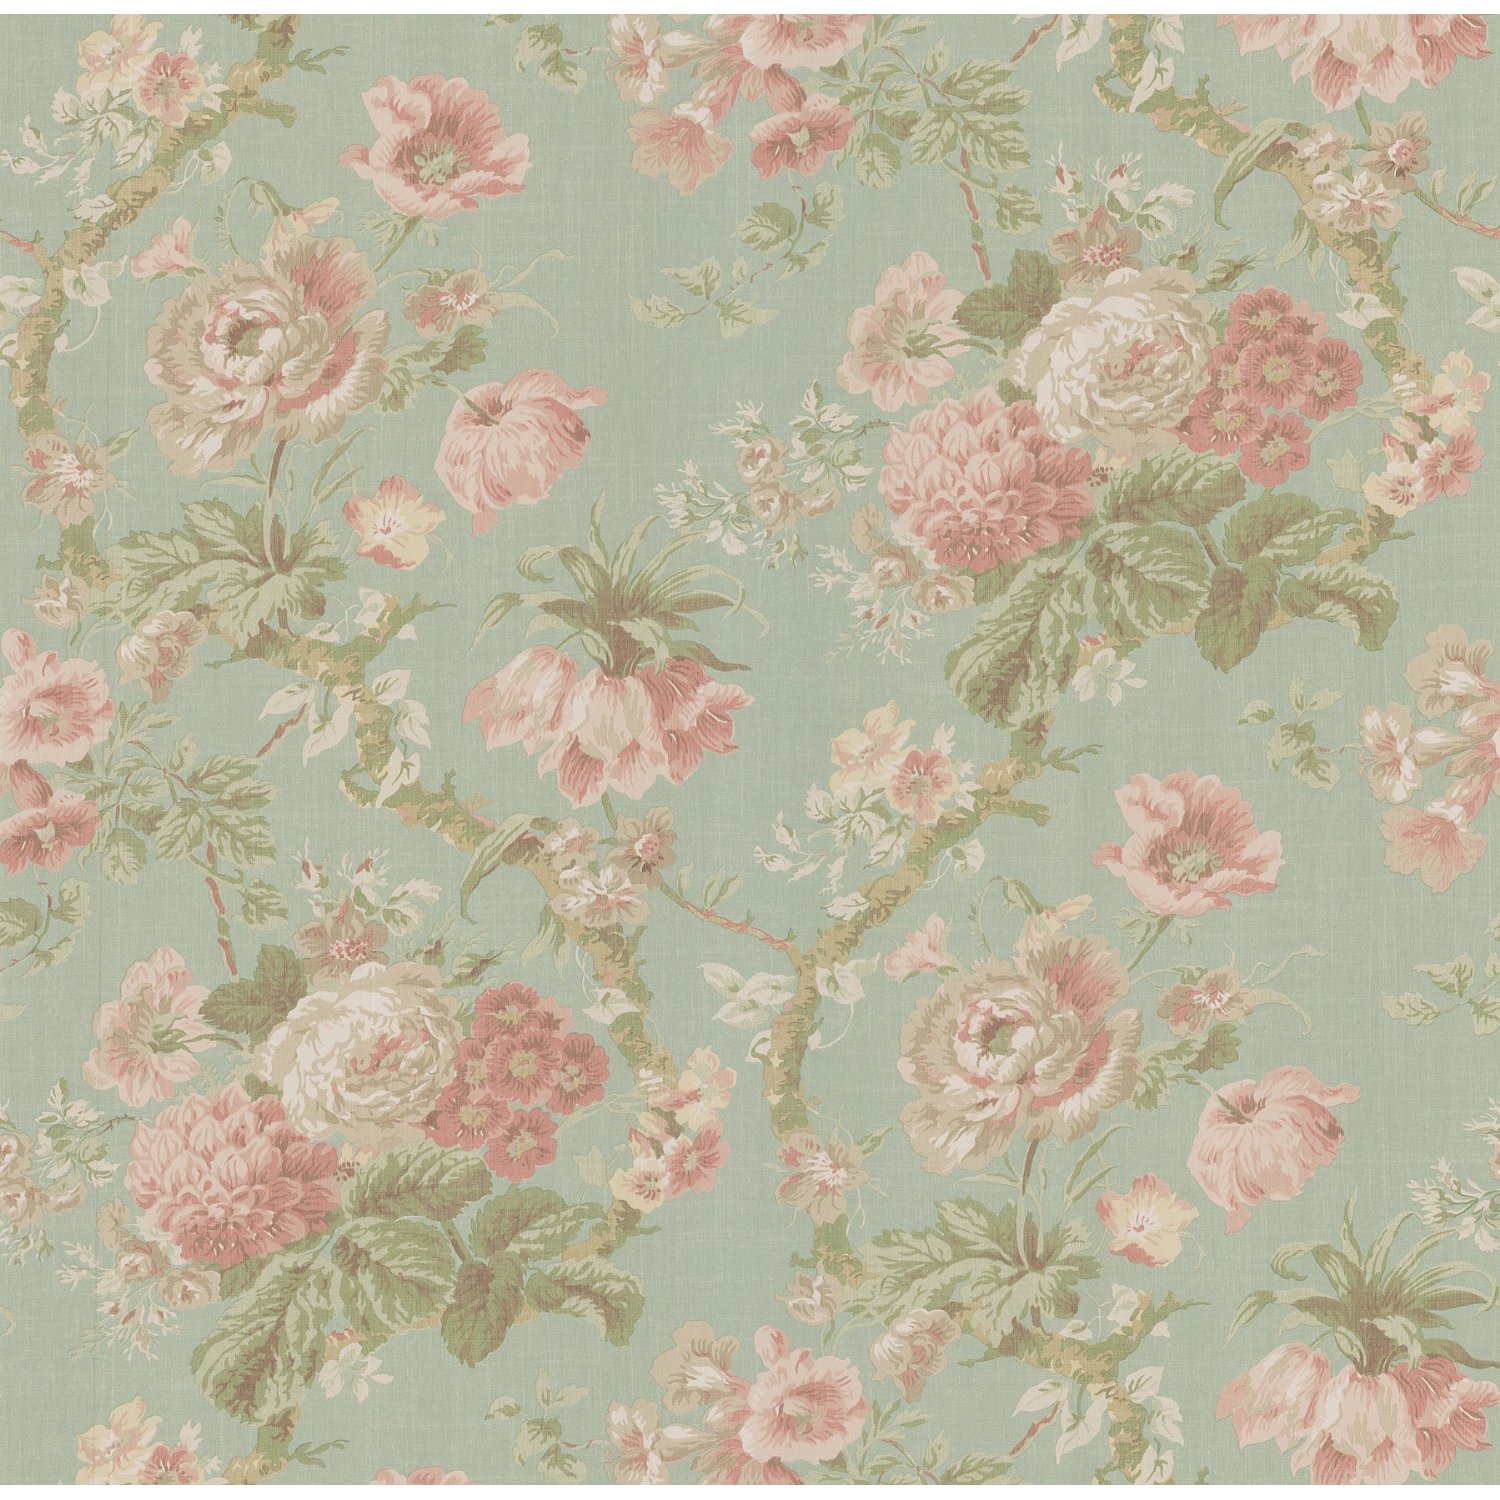 Search For Vintage And Came Up With This Floral Wallpaper